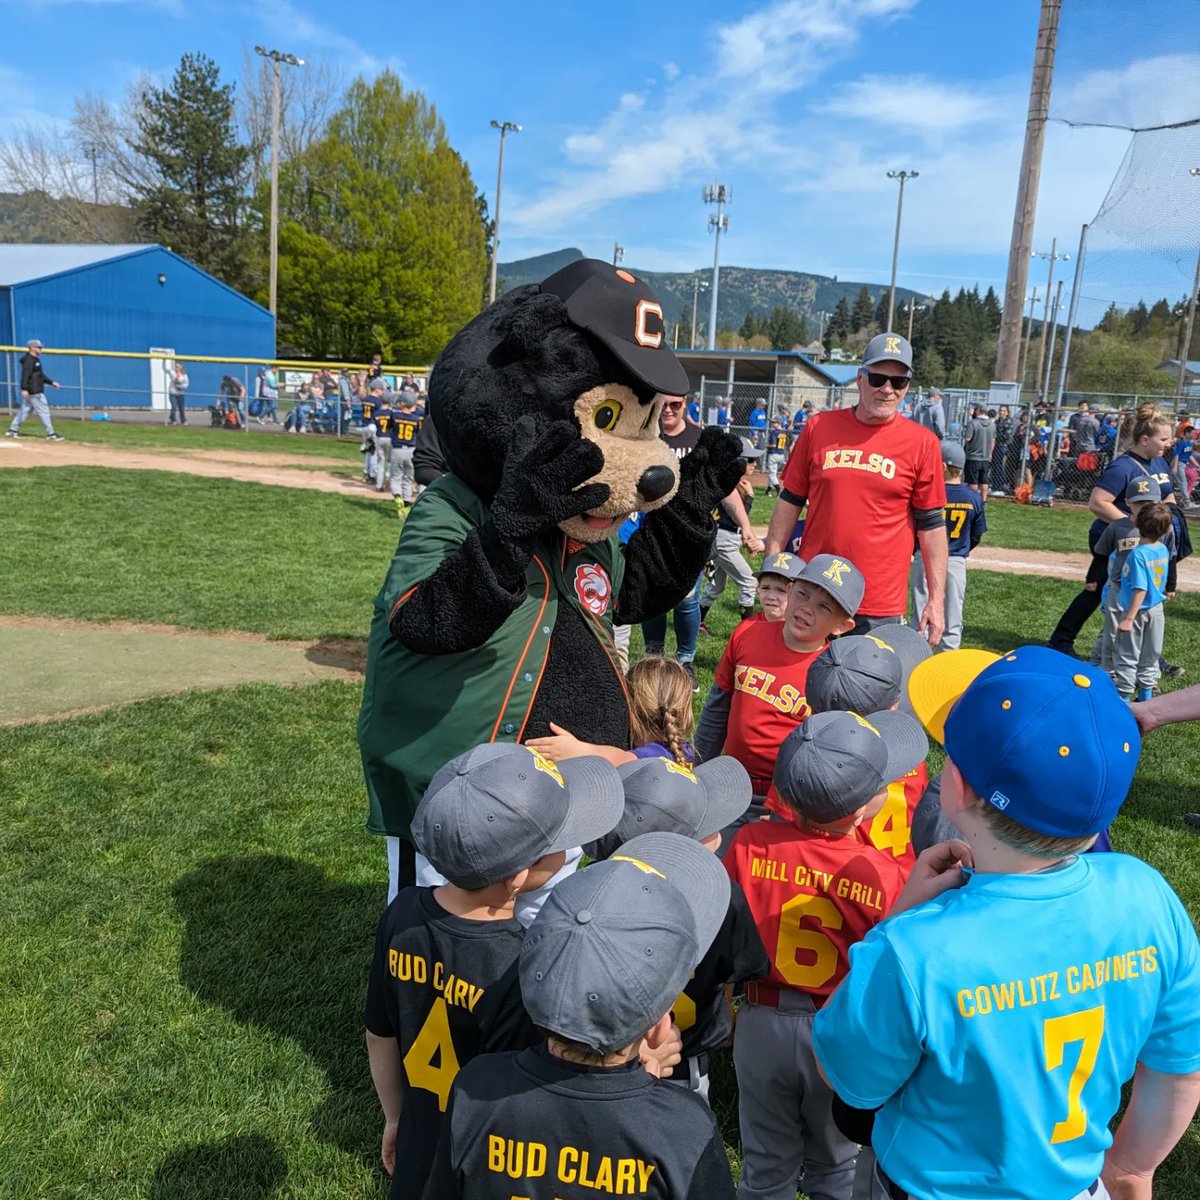 Play ball ⚾ Corby had a busy day helping kick off the youth baseball & softball seasons for 3 great youth organizations in Cowlitz County! Thank you Longview Baseball, Longview Girls Softball Association, and Kelso Youth Baseball for having us out today.